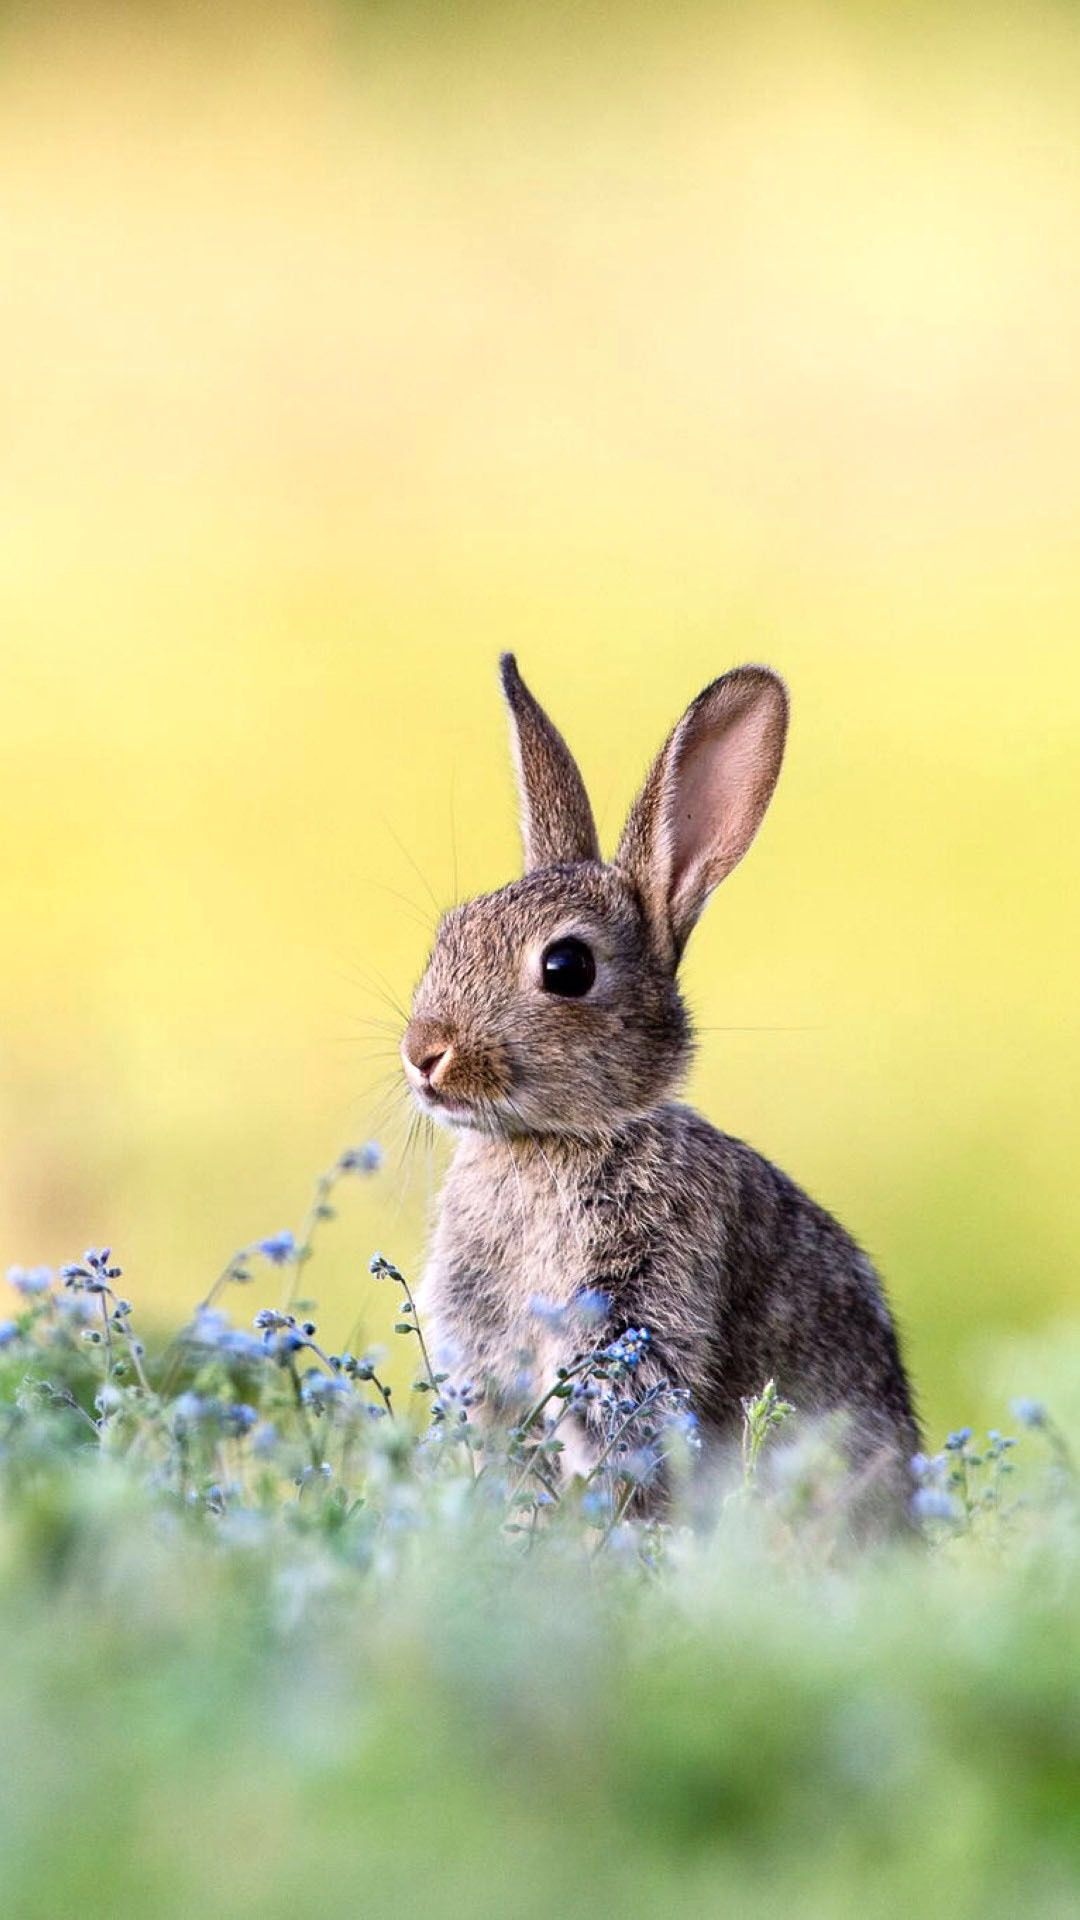 Bunny: Small, furry mammals usually known for their ears and reproductive capability. 1080x1920 Full HD Wallpaper.